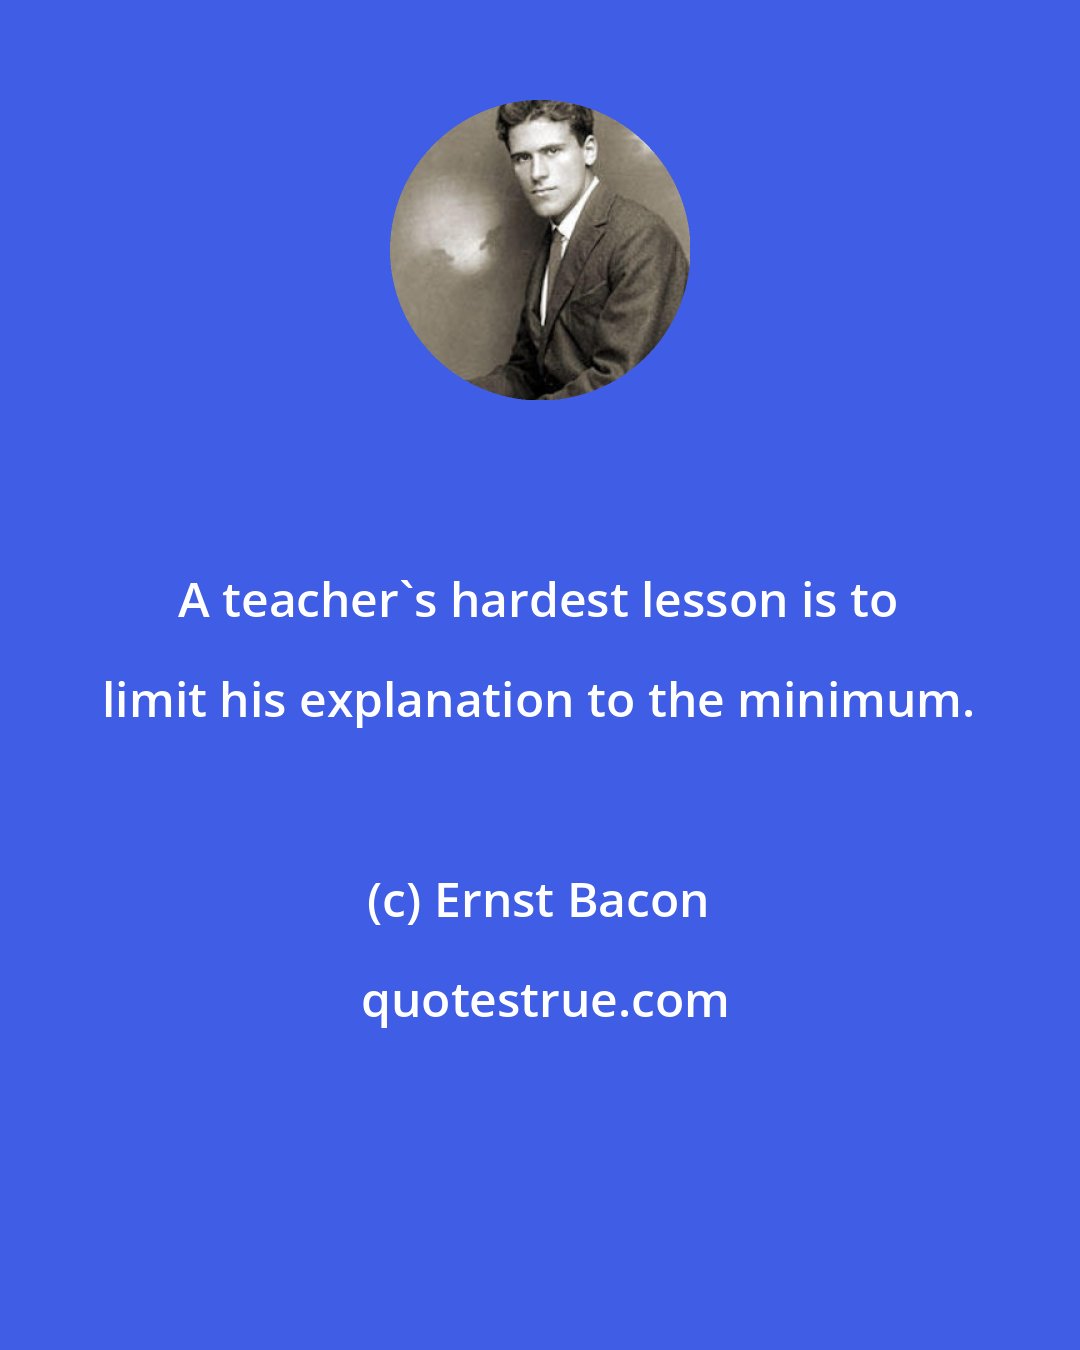 Ernst Bacon: A teacher's hardest lesson is to limit his explanation to the minimum.